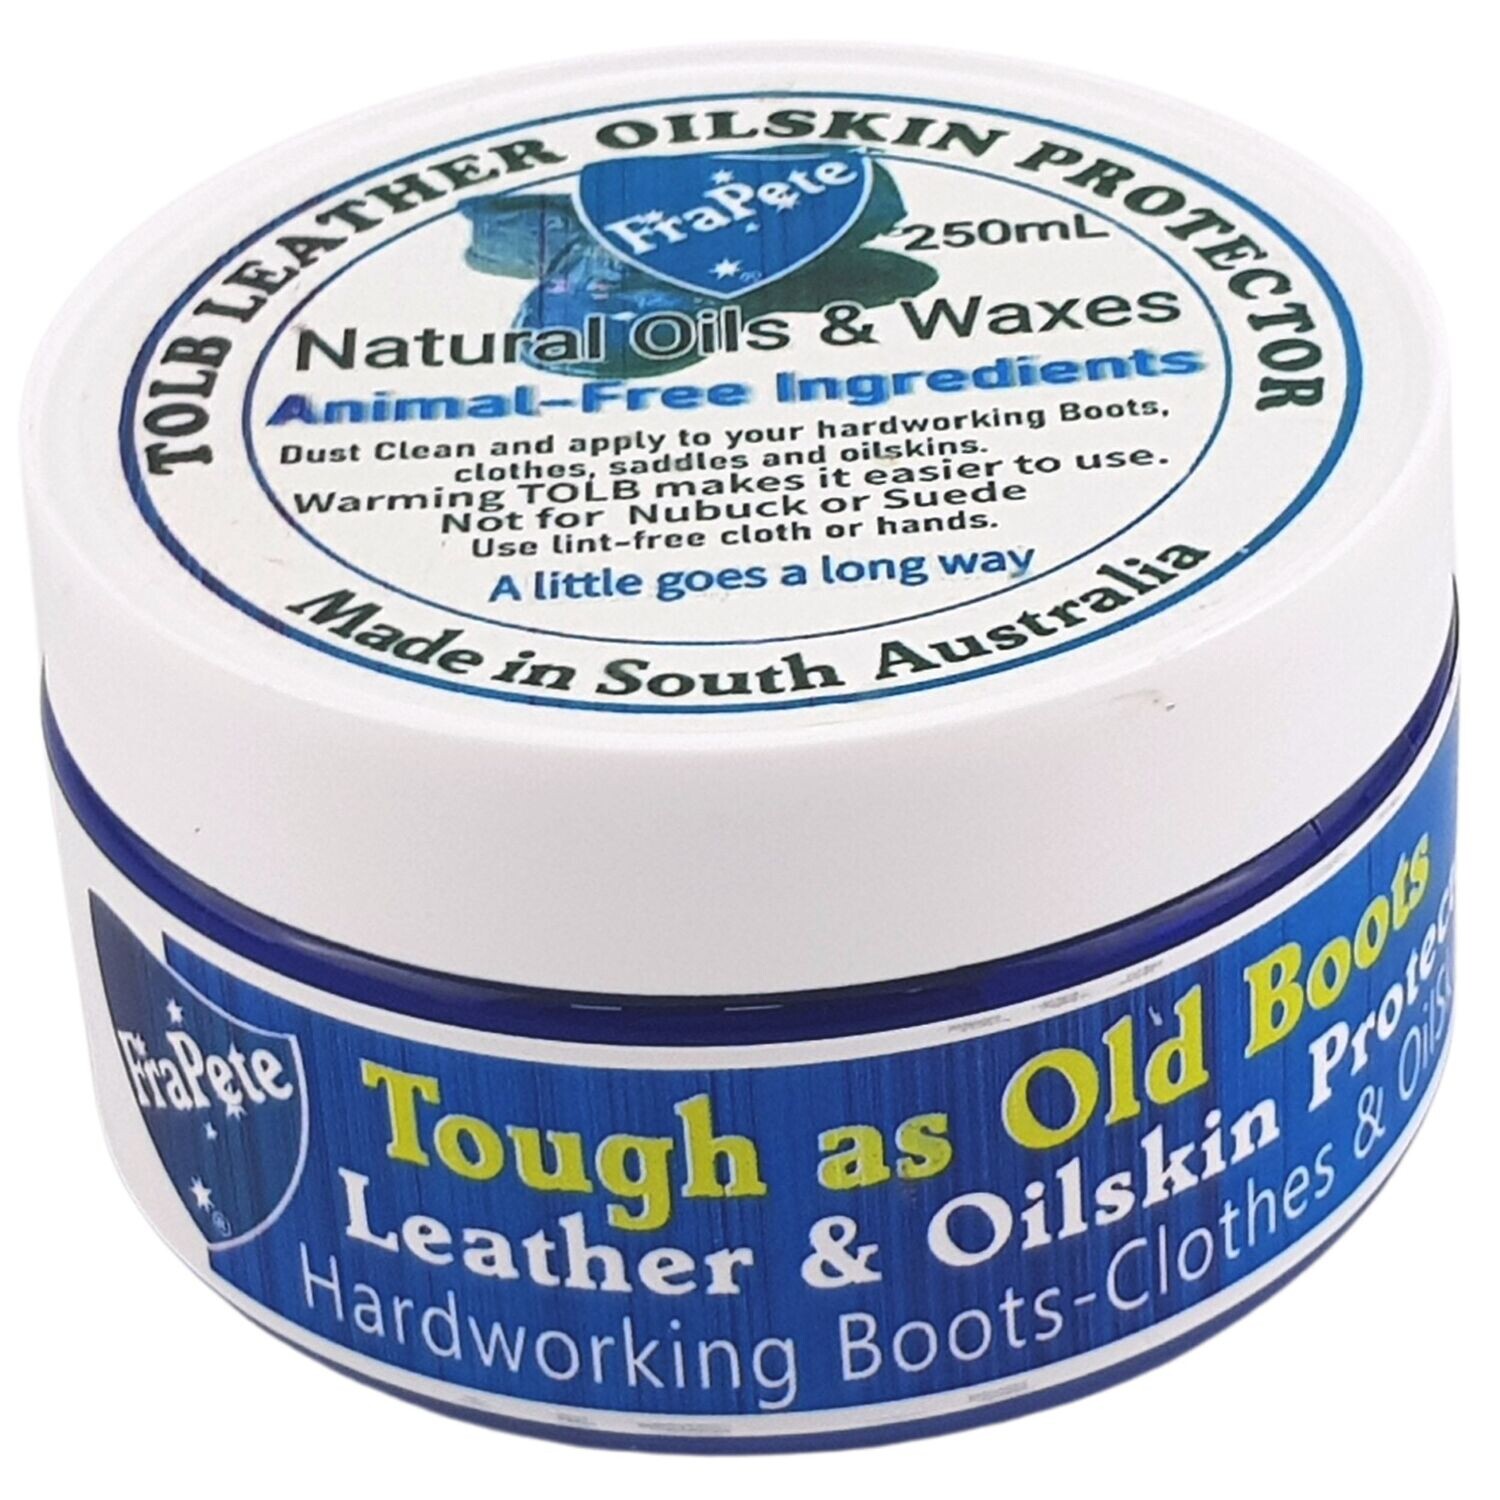 FraPete Tough as Old Boots Leather Oilskin Protector 250mL